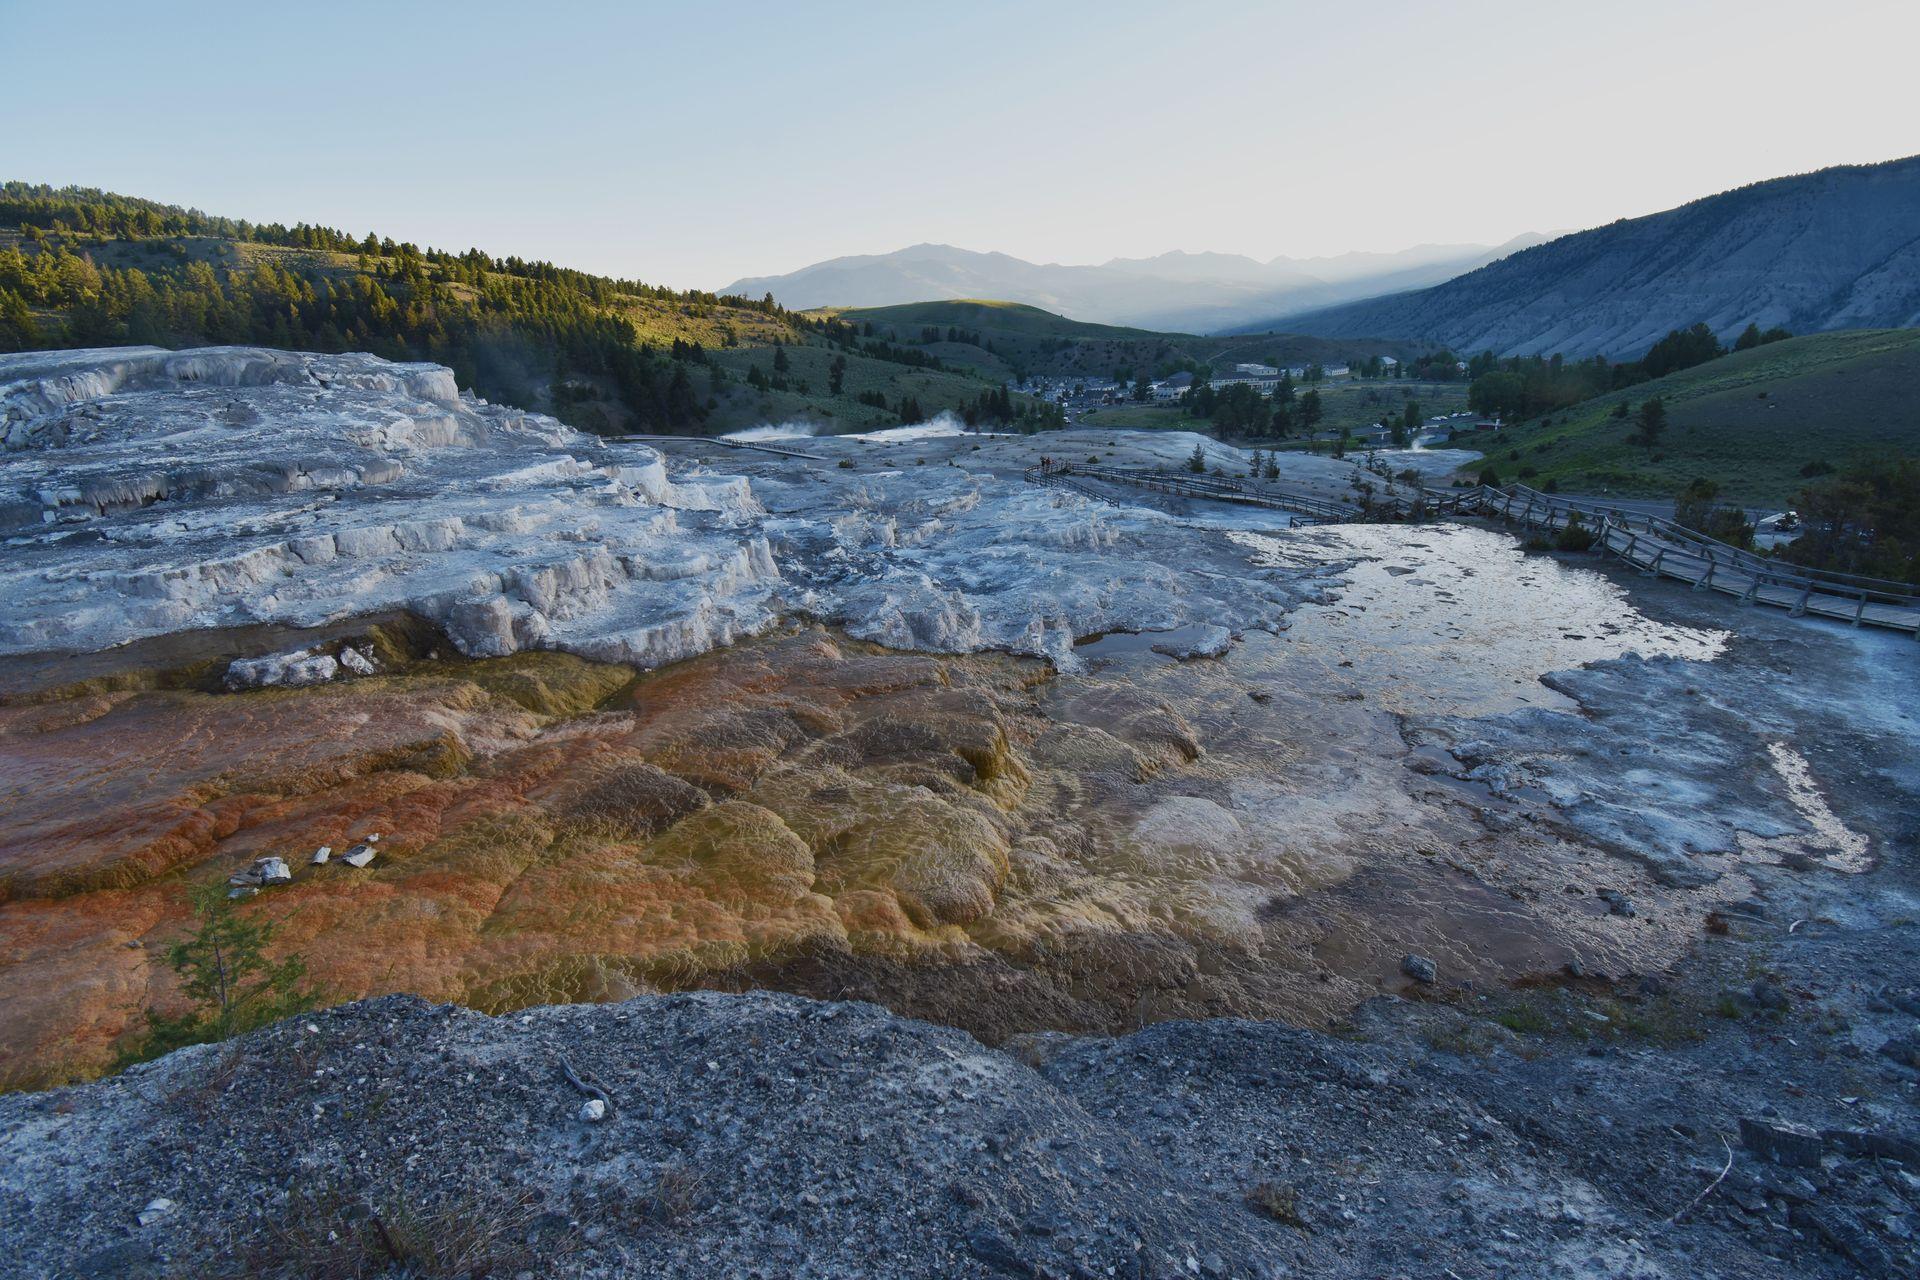 A view of orange and white hardened rock at the Mammoth Hot Springs. There are mountains in the distance.